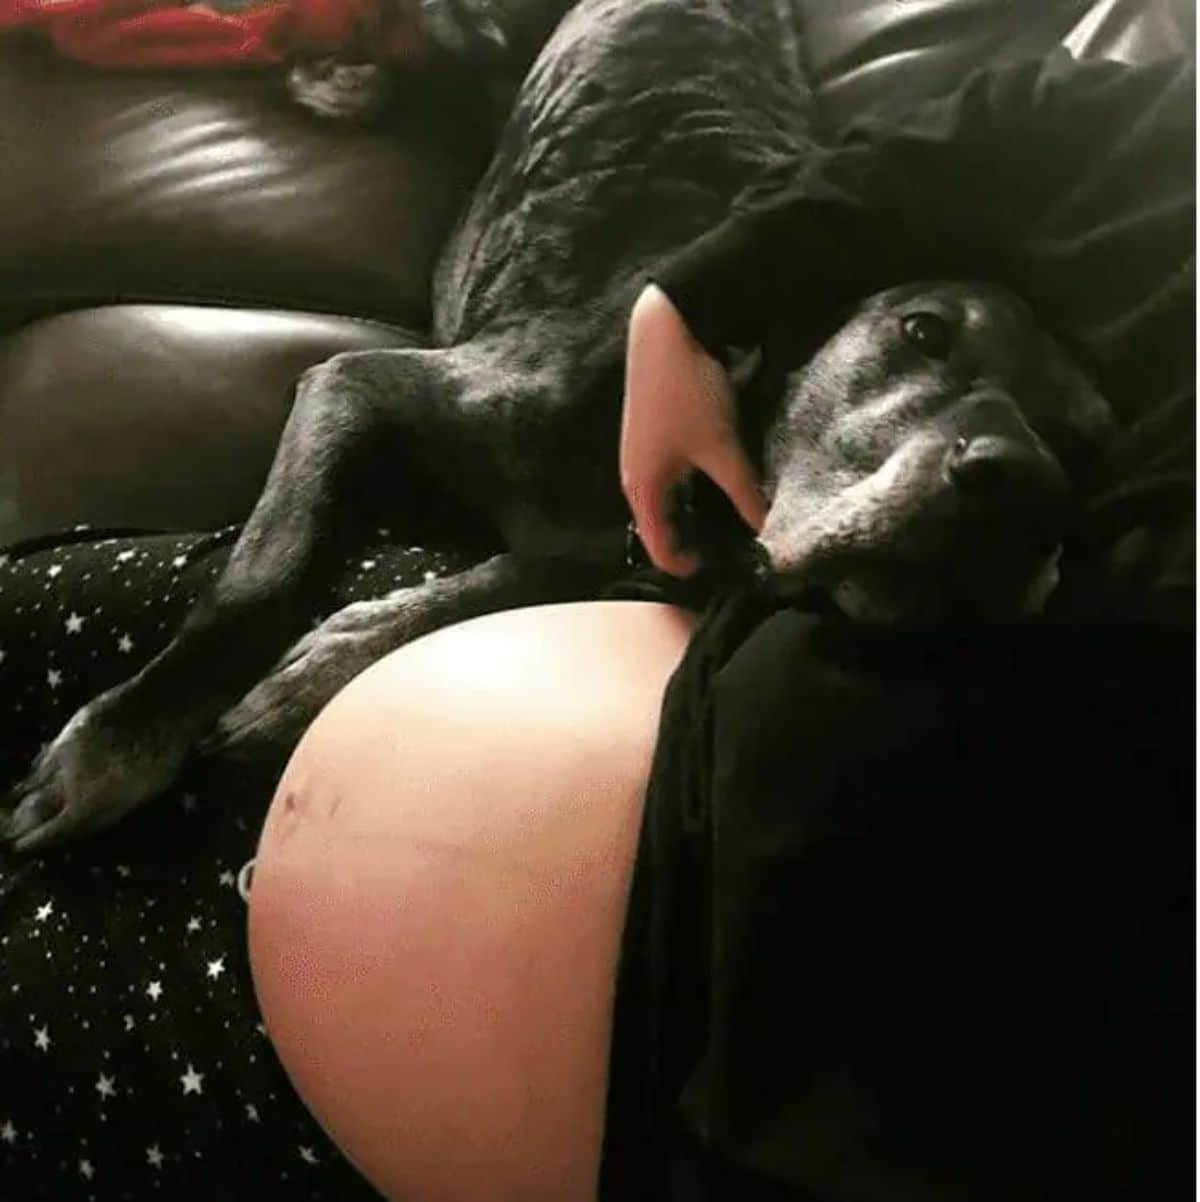 black dog laying on a brown sofa and laying its head on a pregnant person's baby bump and looking up at their face